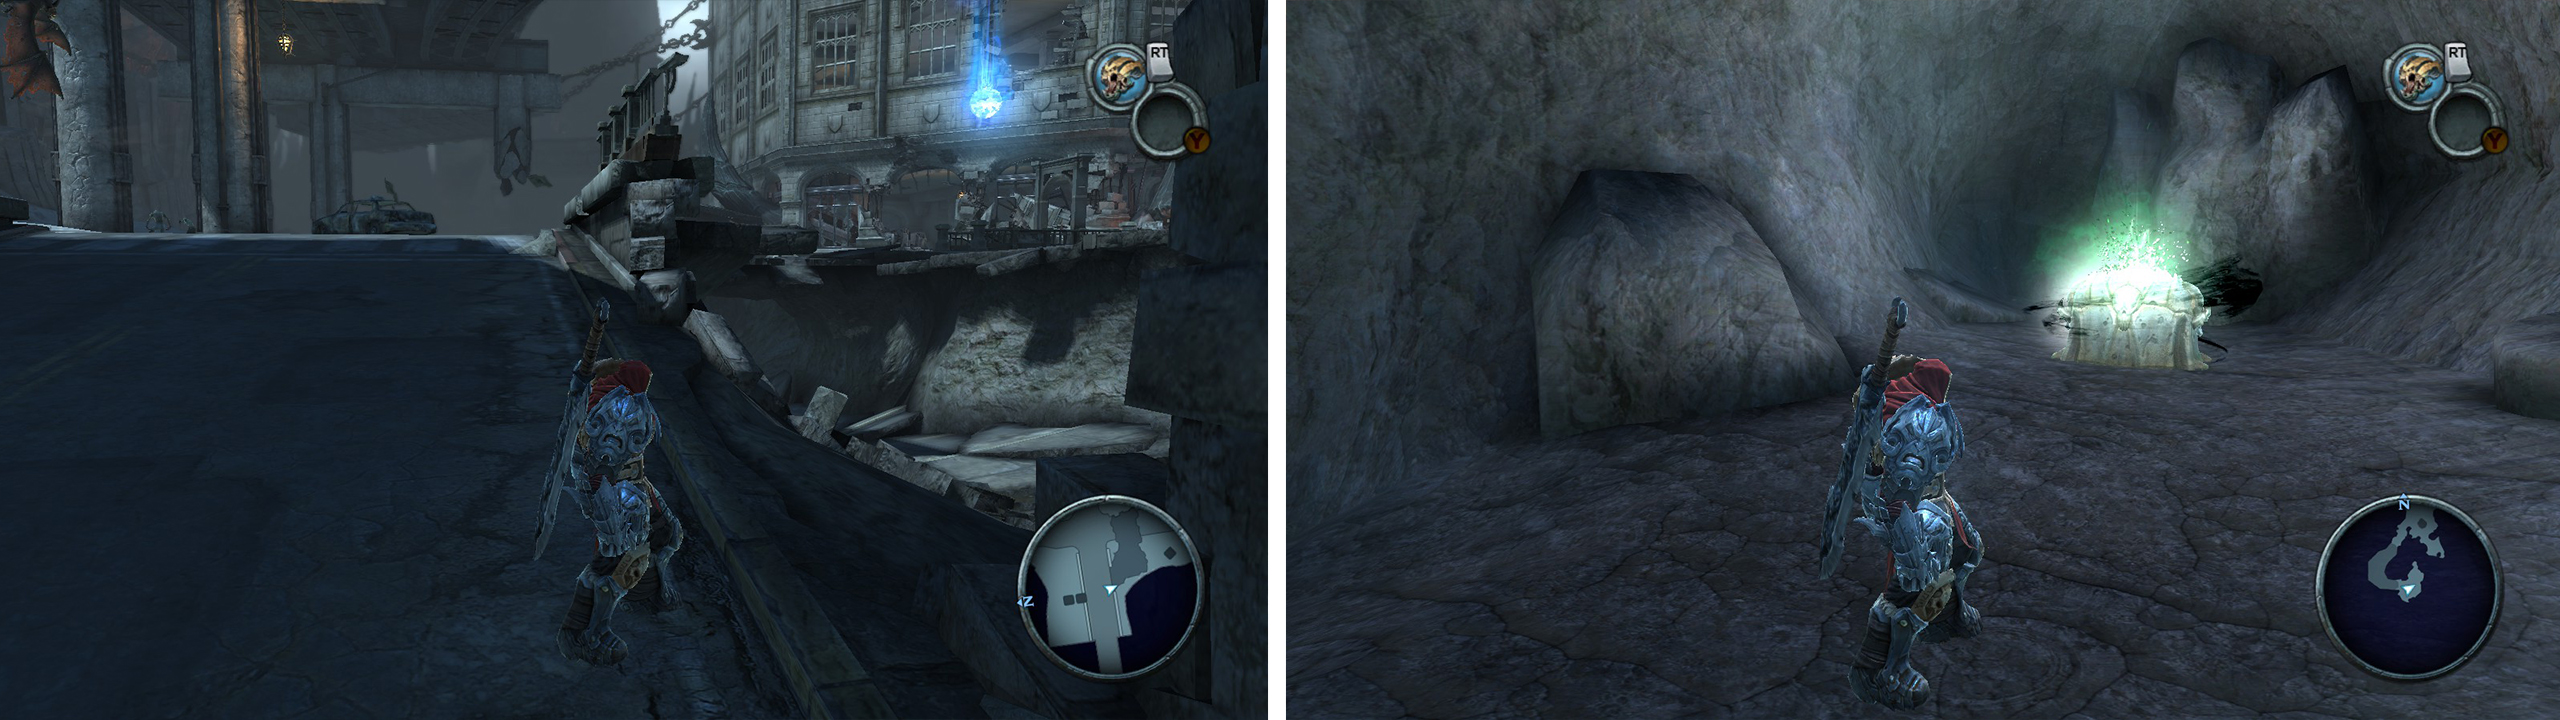 Upon entering the Broken Stair go through the destroyed wall (left) to find an Artefact. The water in Vulgrim’s location has a tunnel leading to a Life Stone Shard (right).